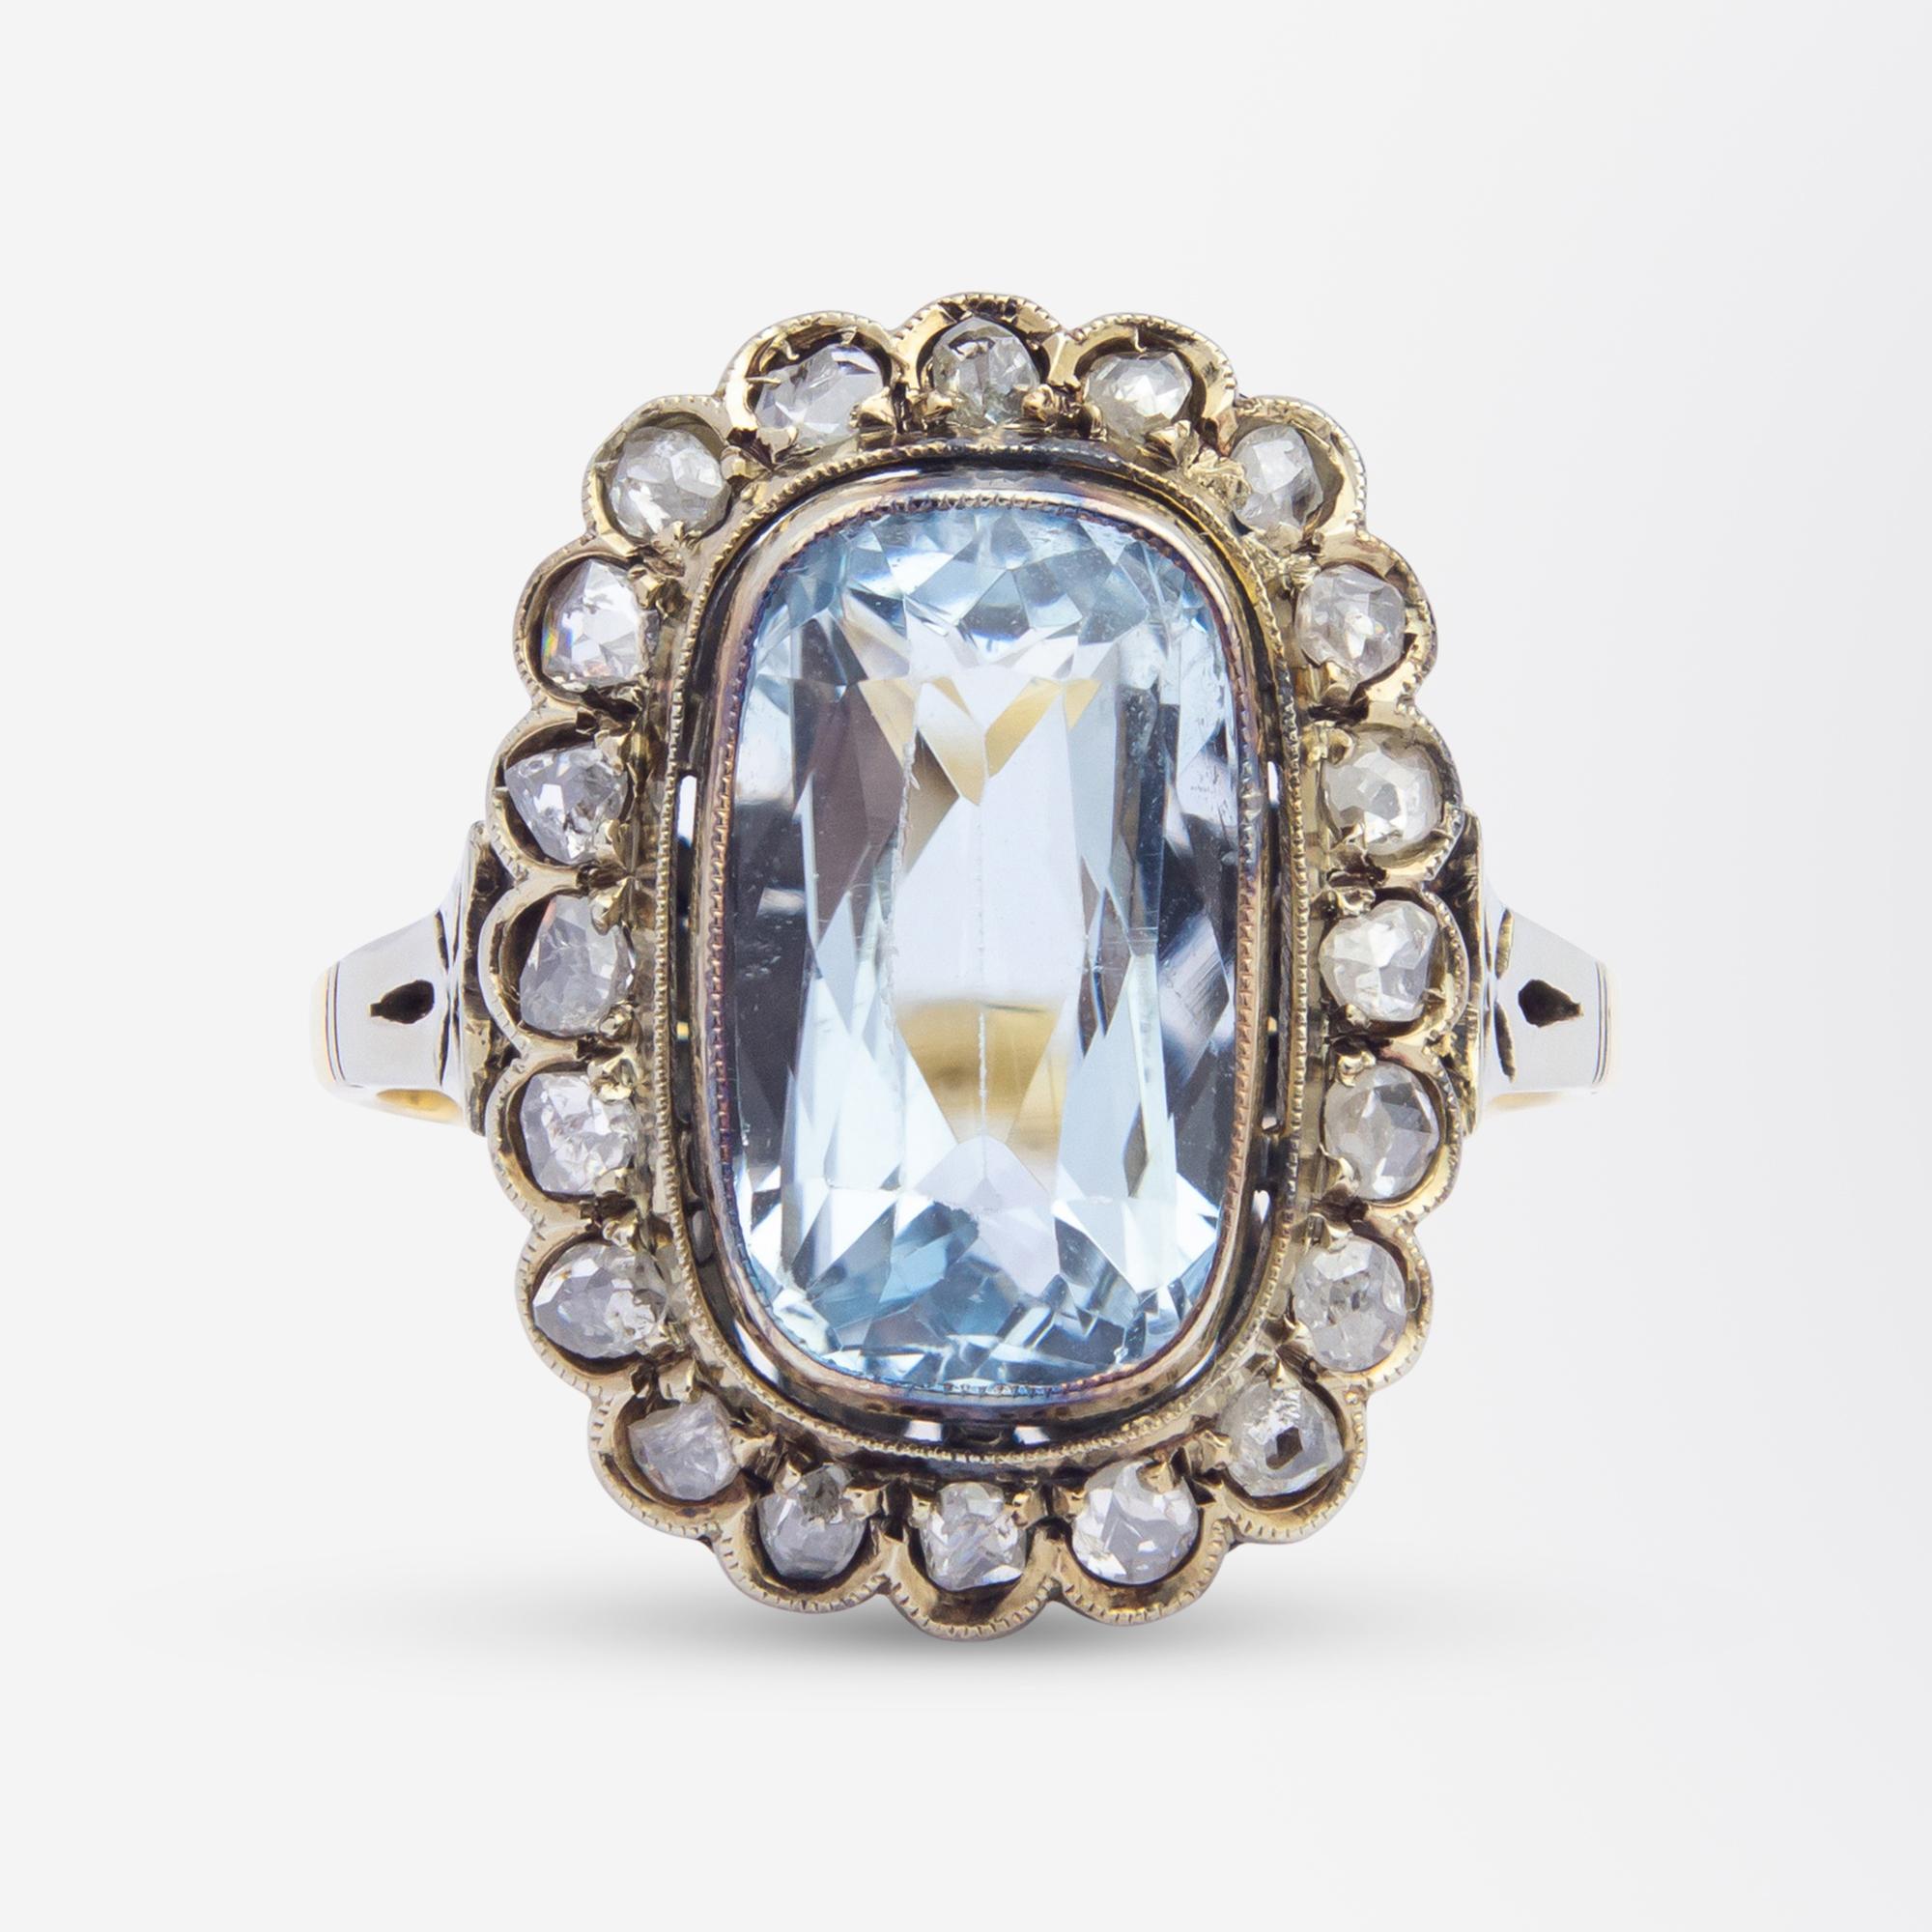 This Edwardian era aquamarine and diamond ring has been crafted from 18 karat yellow gold. The central oval cut aquamarine measures 3.50 carat and is surrounded by a halo of 20 rose cut diamonds of I/J colour and SI/P1 clarity totalling 0.60 carat.